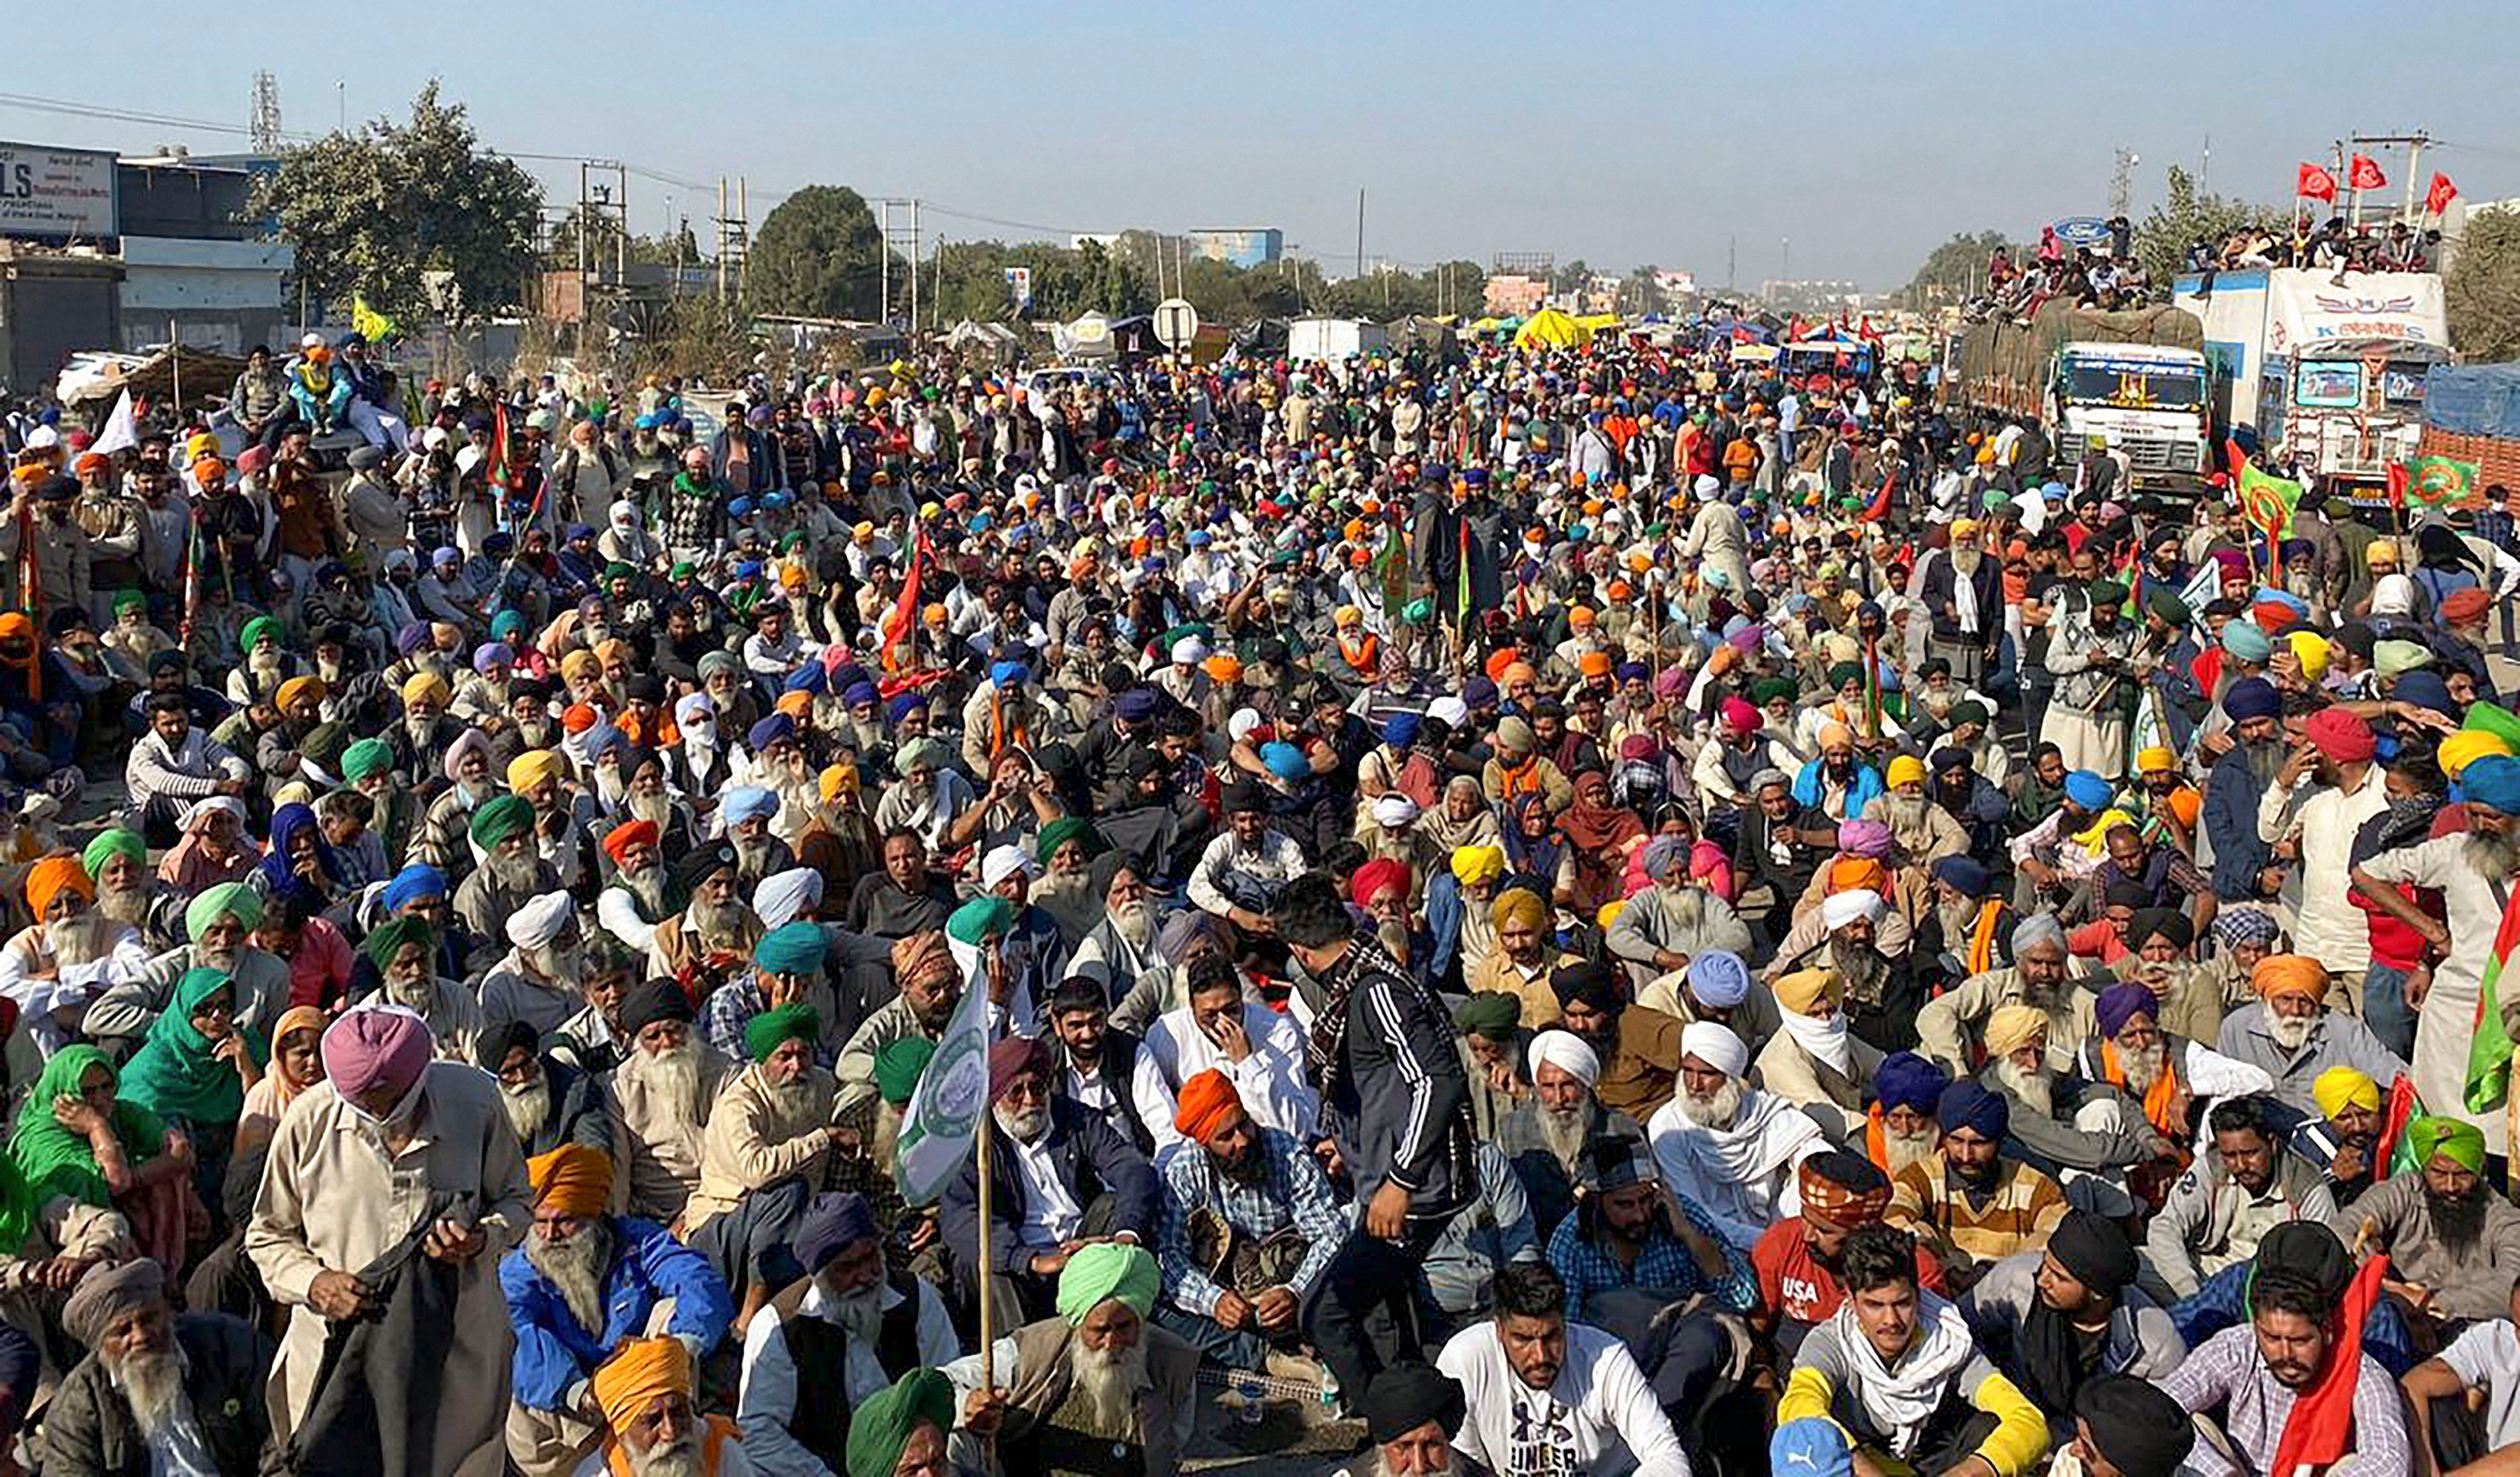 Farmers gathered at the Singhu border as part of their "Delhi Chalo" protest against Centre's new farm laws, in New Delhi, Saturday, Nov 28, 2020. Credit: PTI Photo